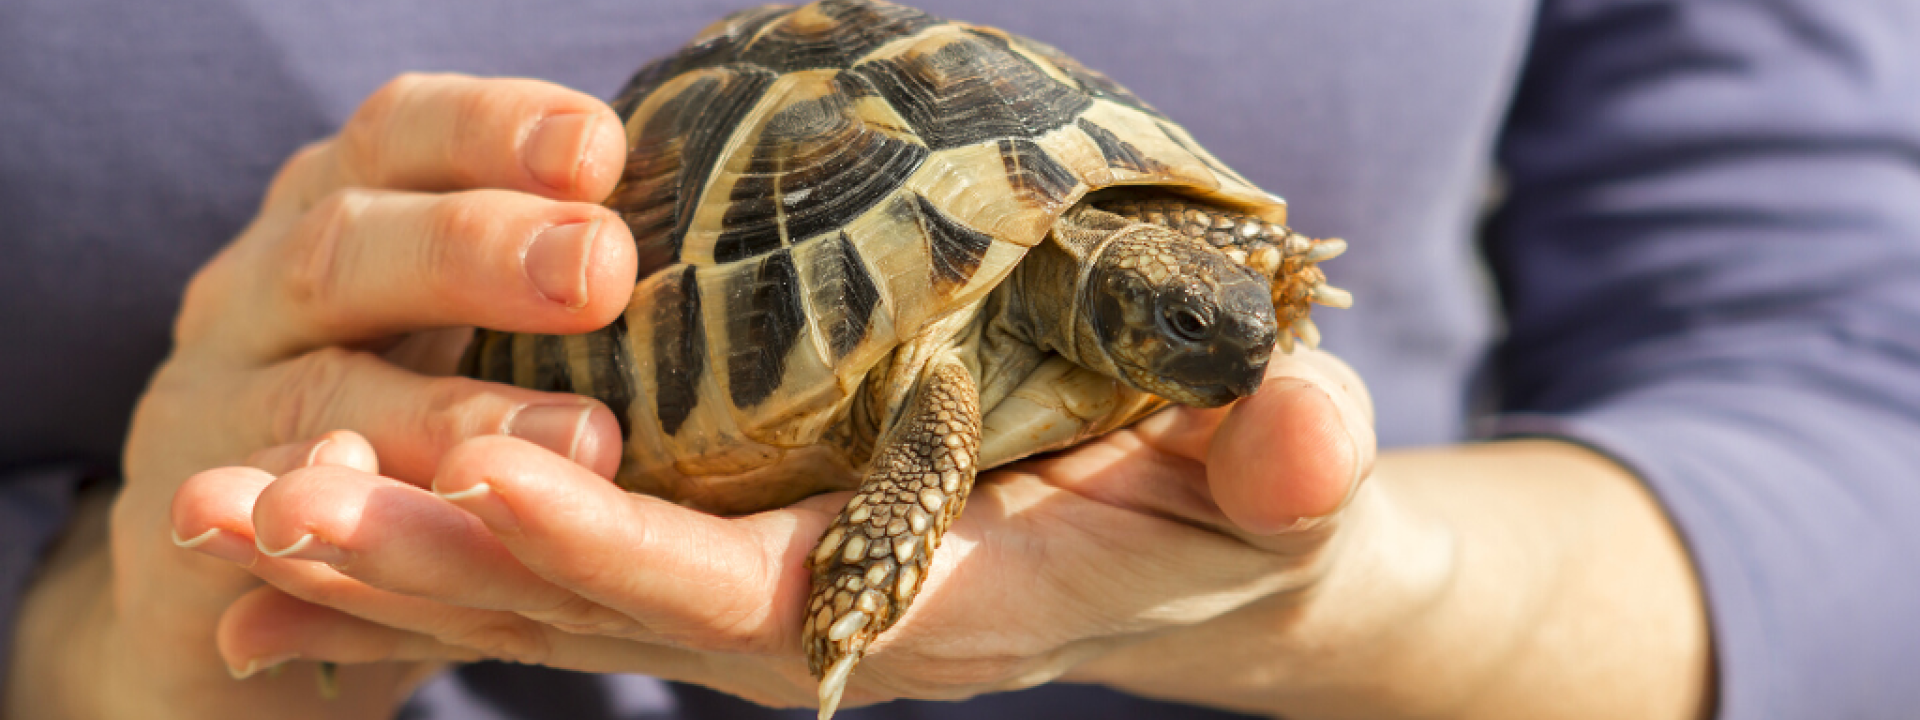 Small turtles, pet in the hands of a woman